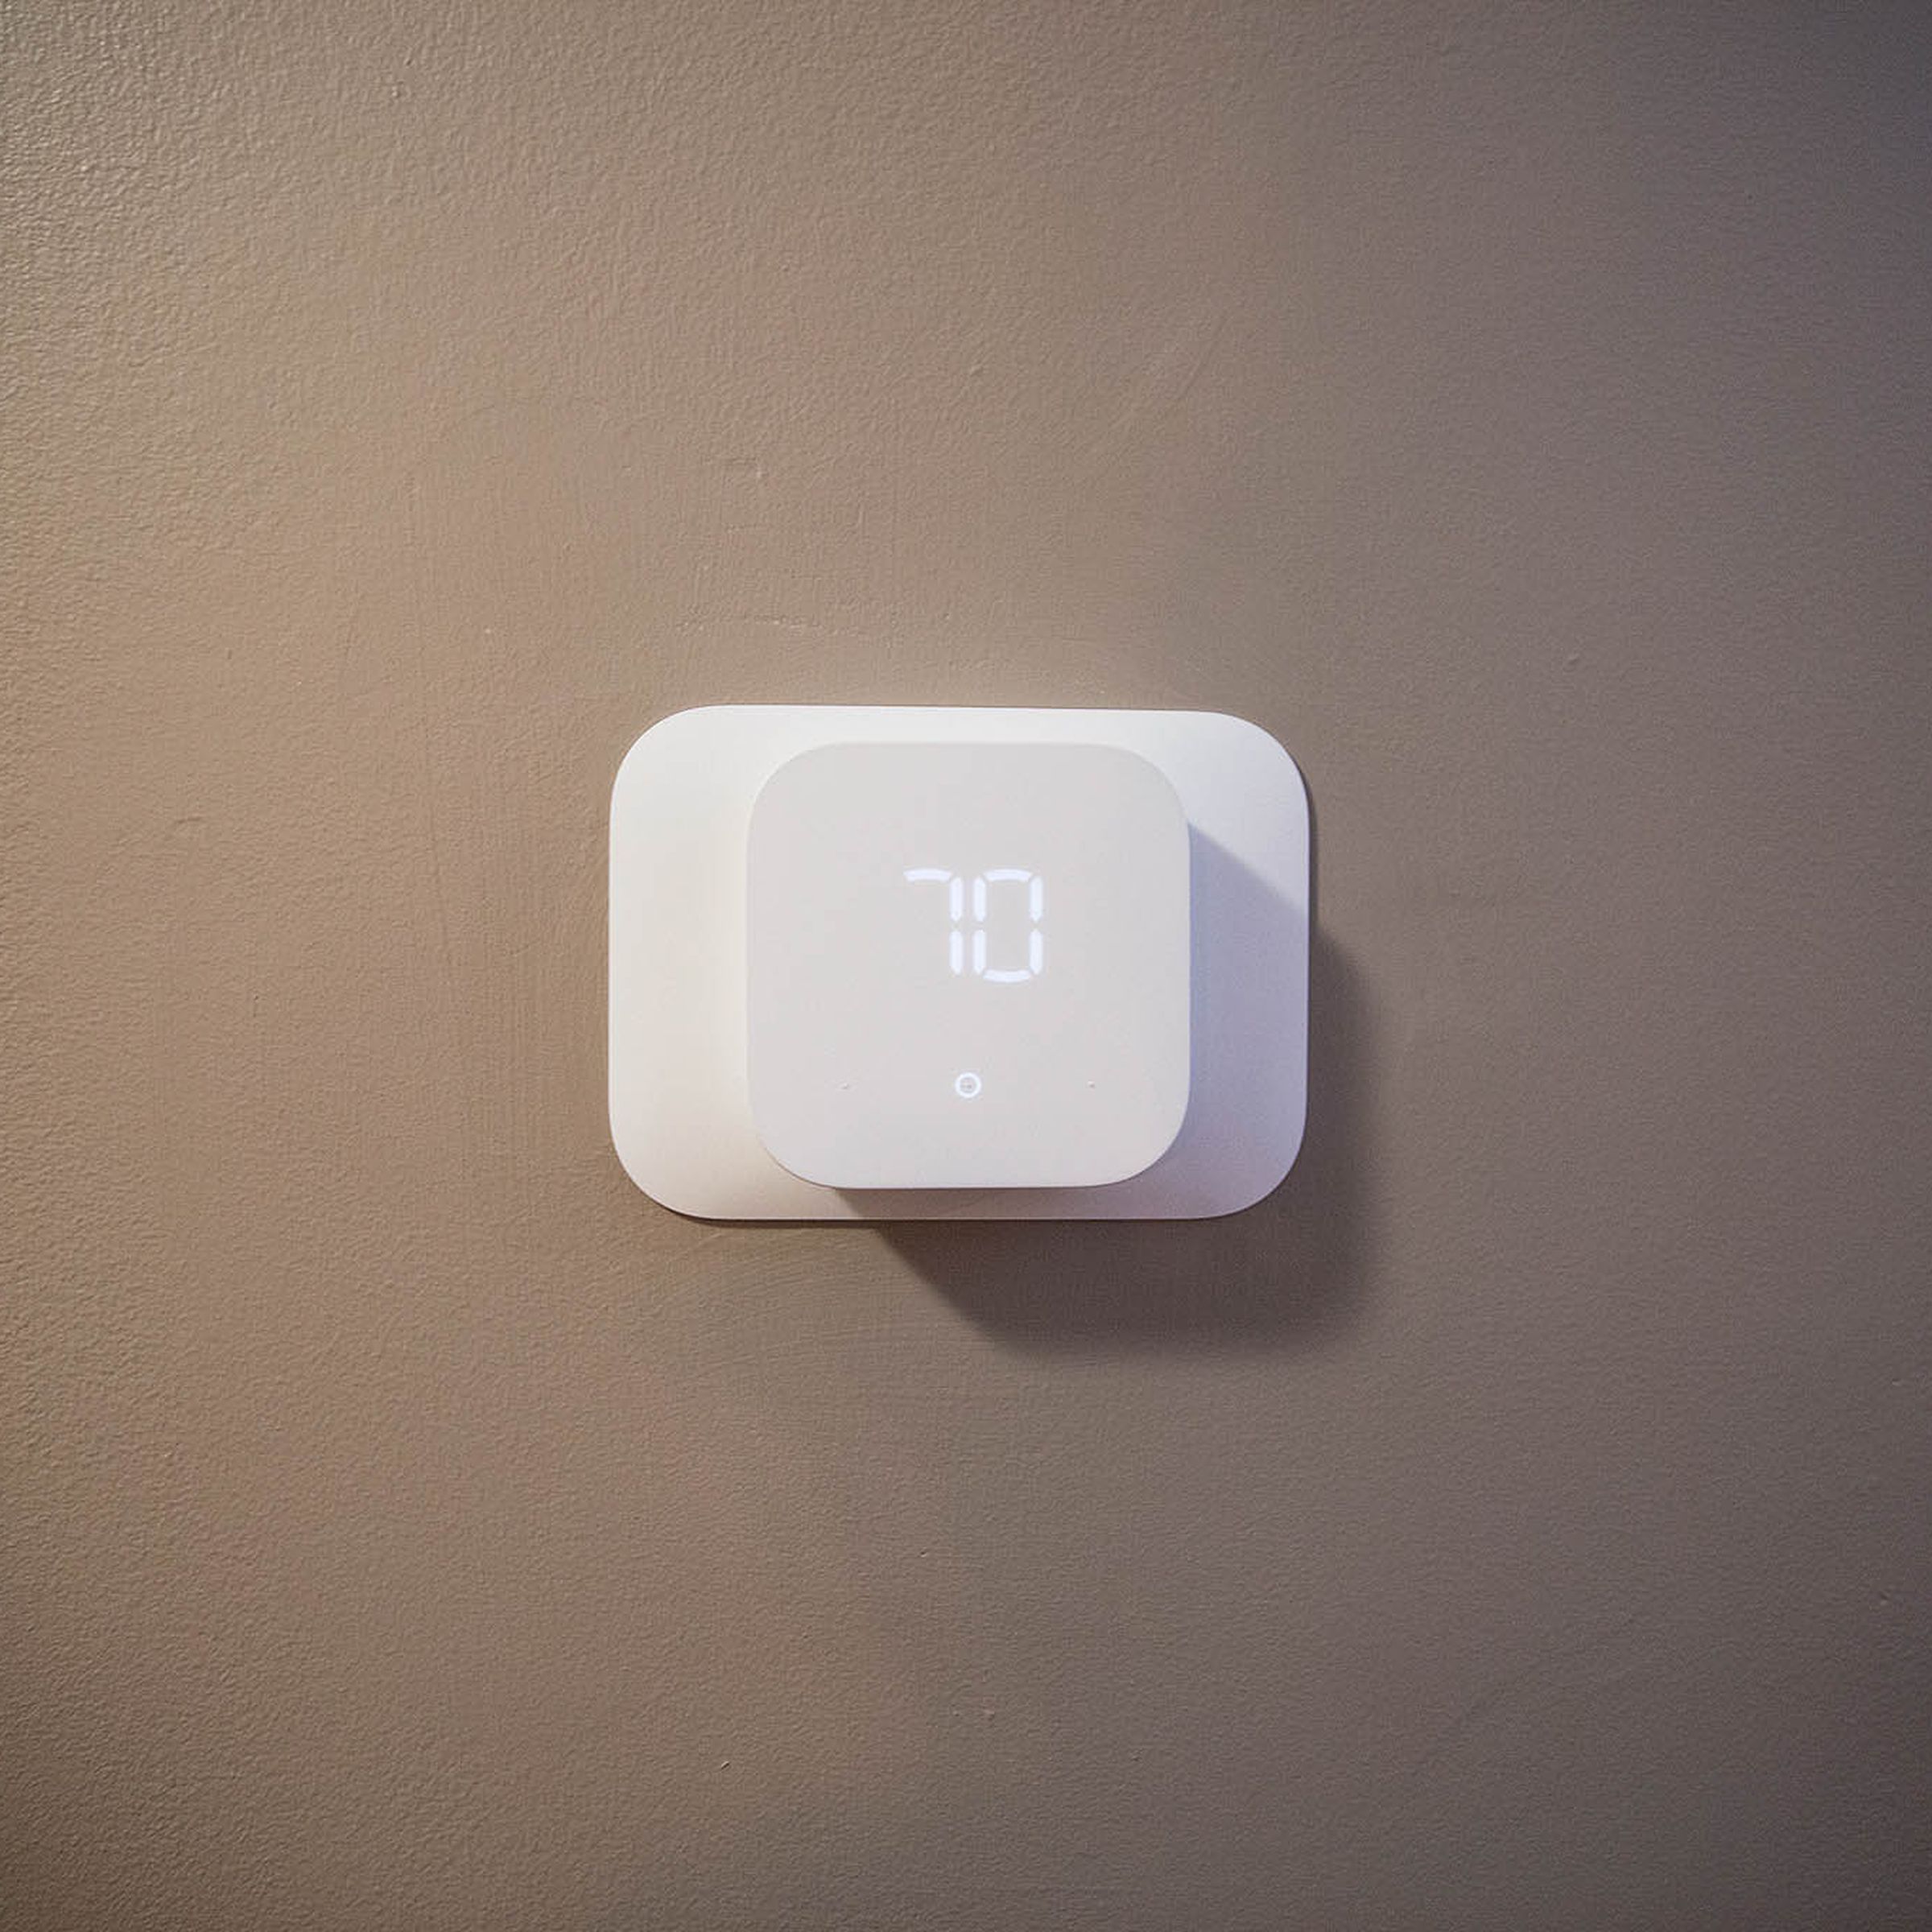 Amazon’s first smart thermostat is very good.